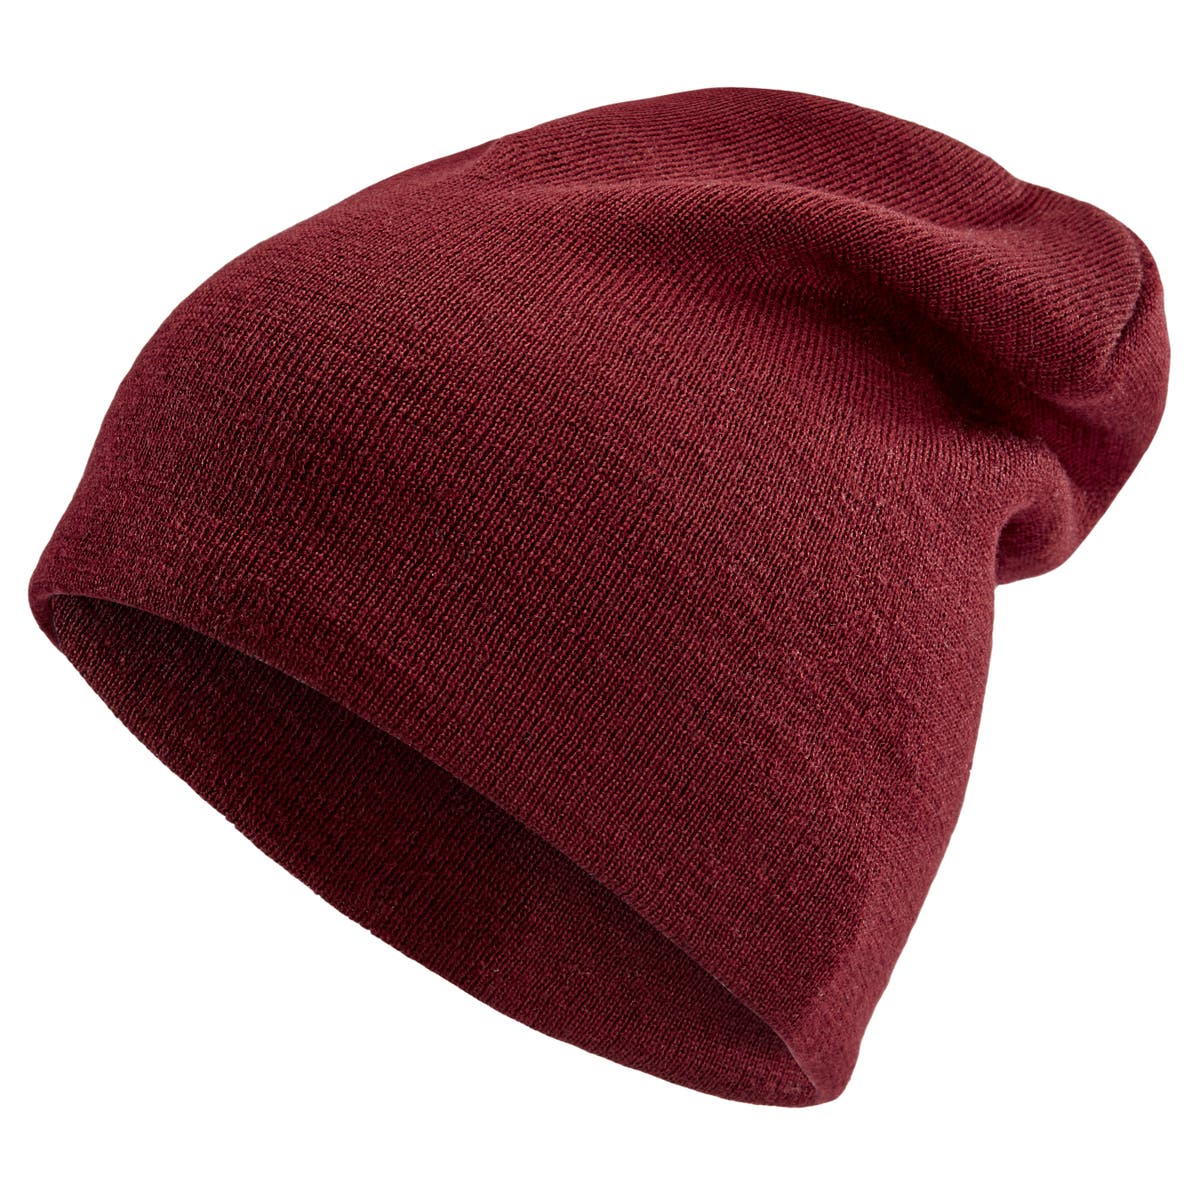 Knitted | Beanie Mix Fawler Acrylic In Fine Burgundy stock! |